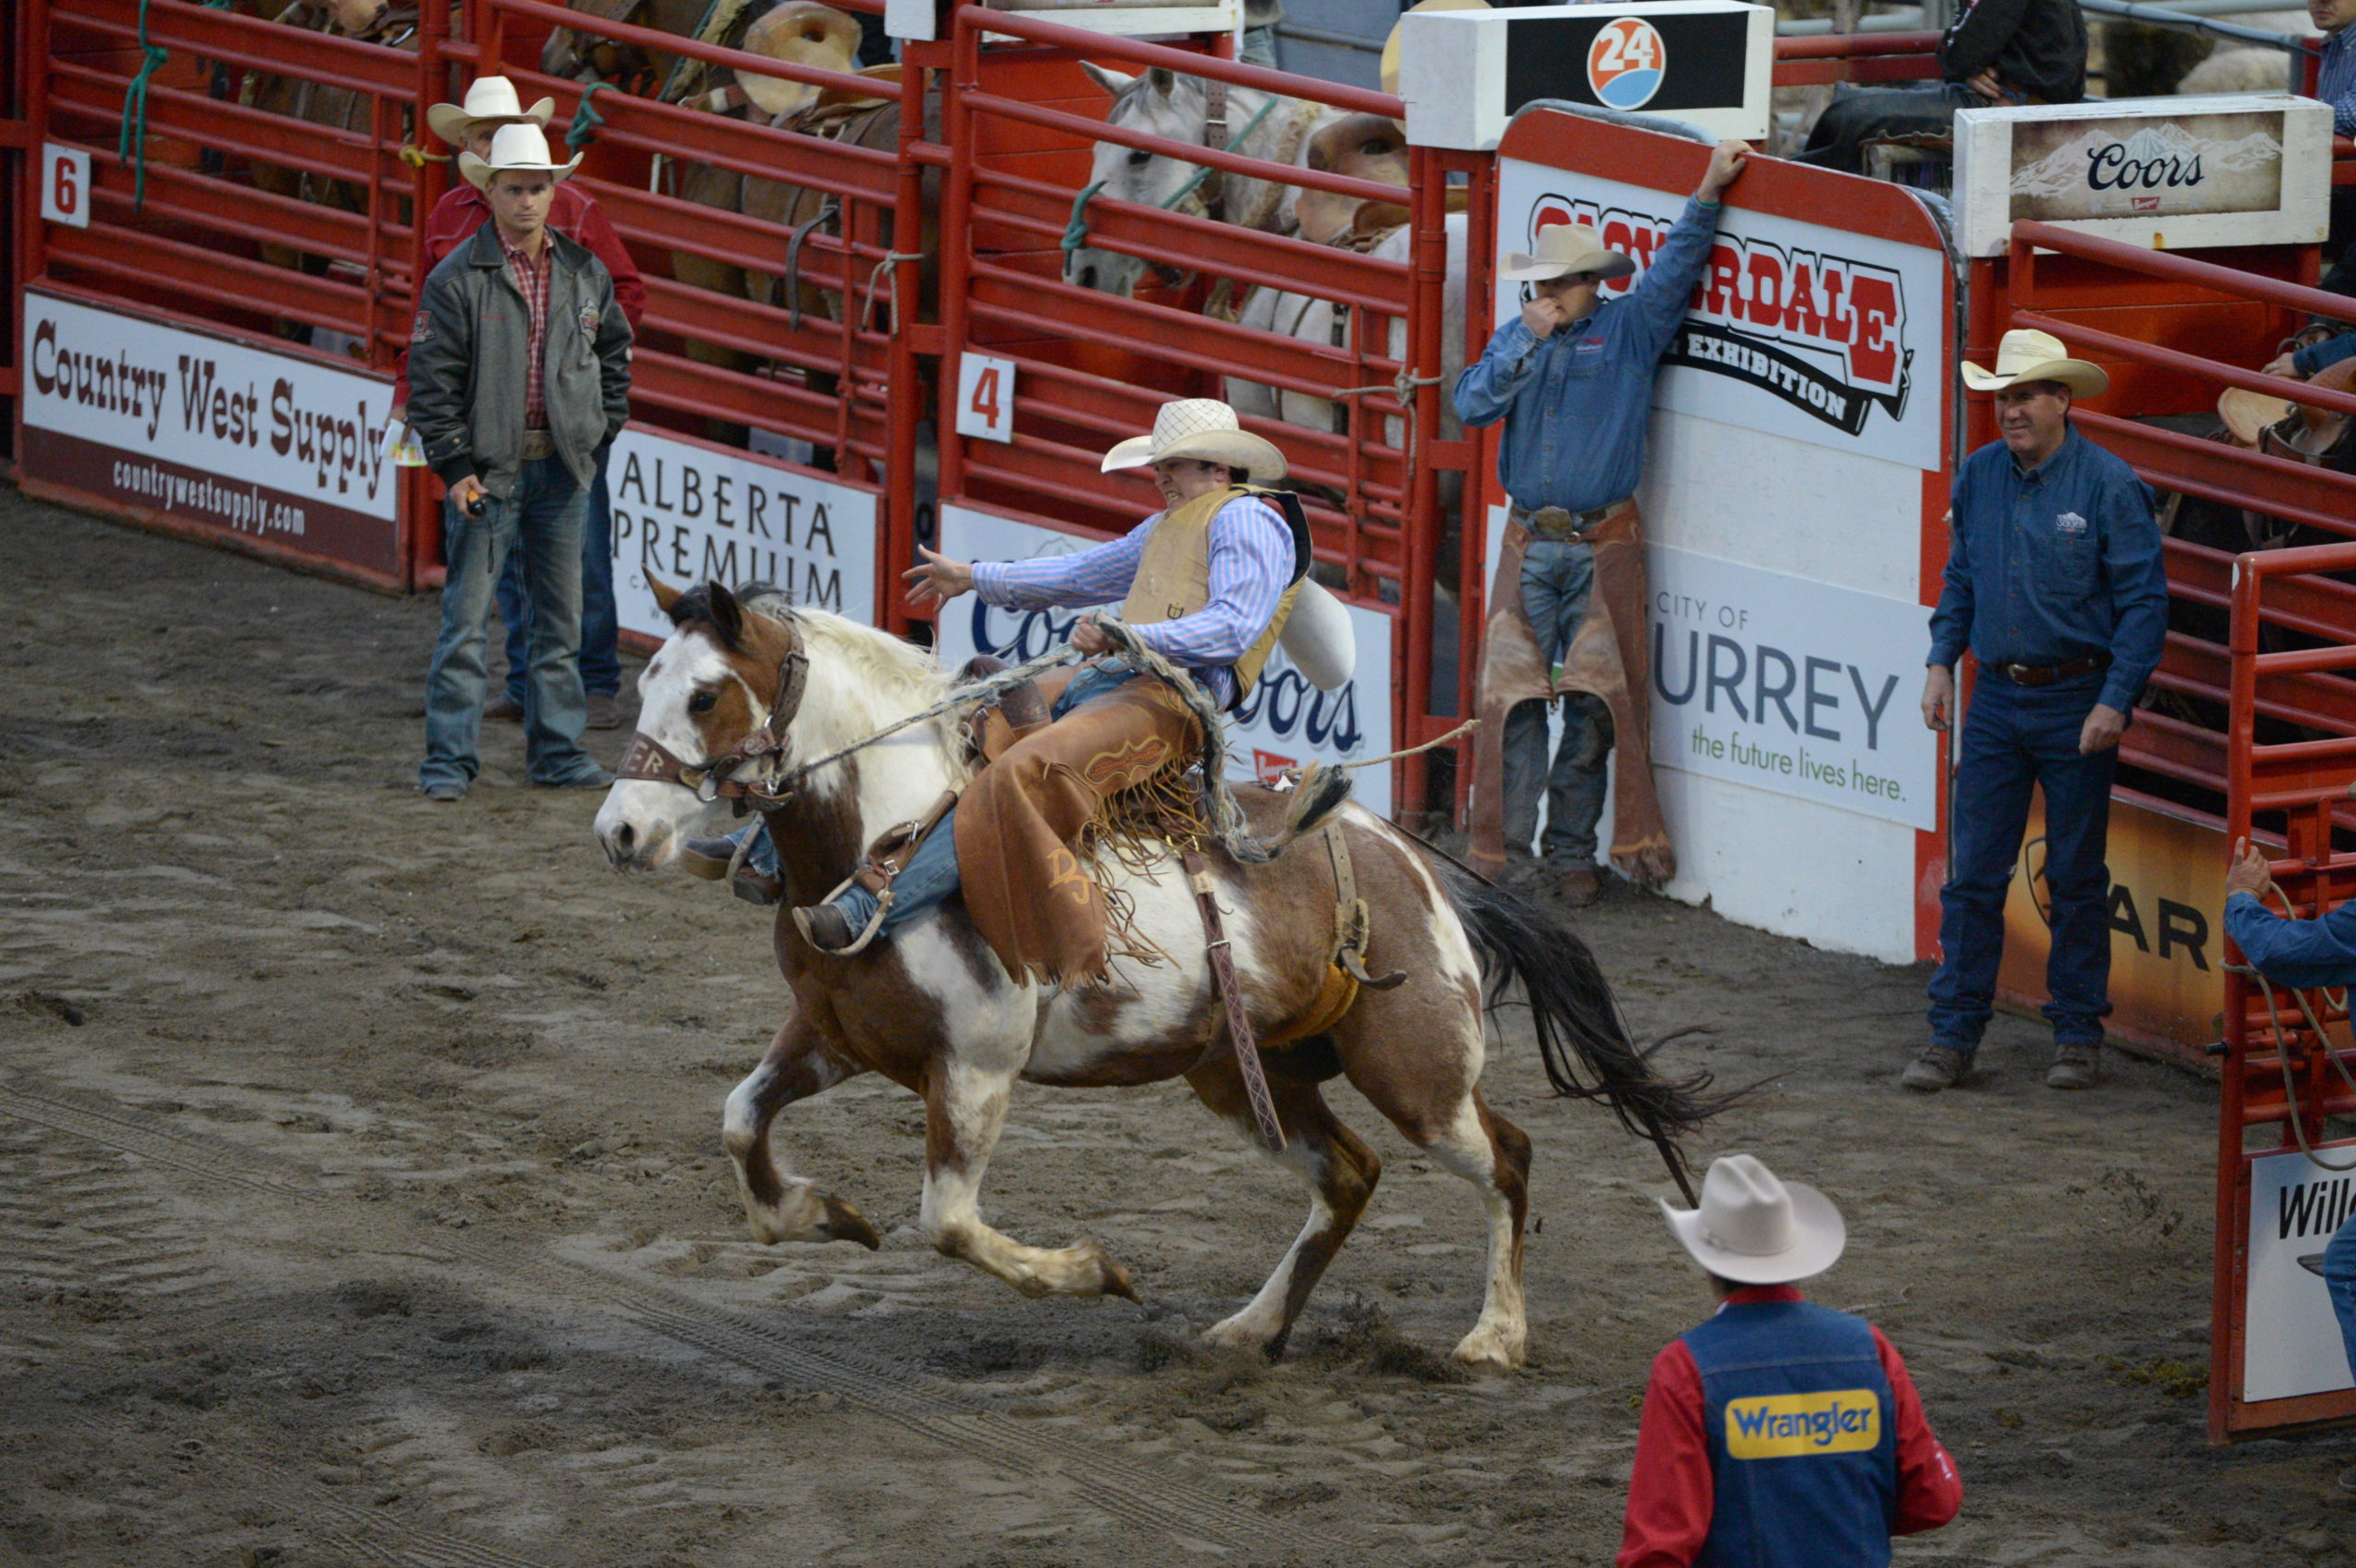 2022 Cloverdale Rodeo cancelled, focus shifts to Country Fair only event